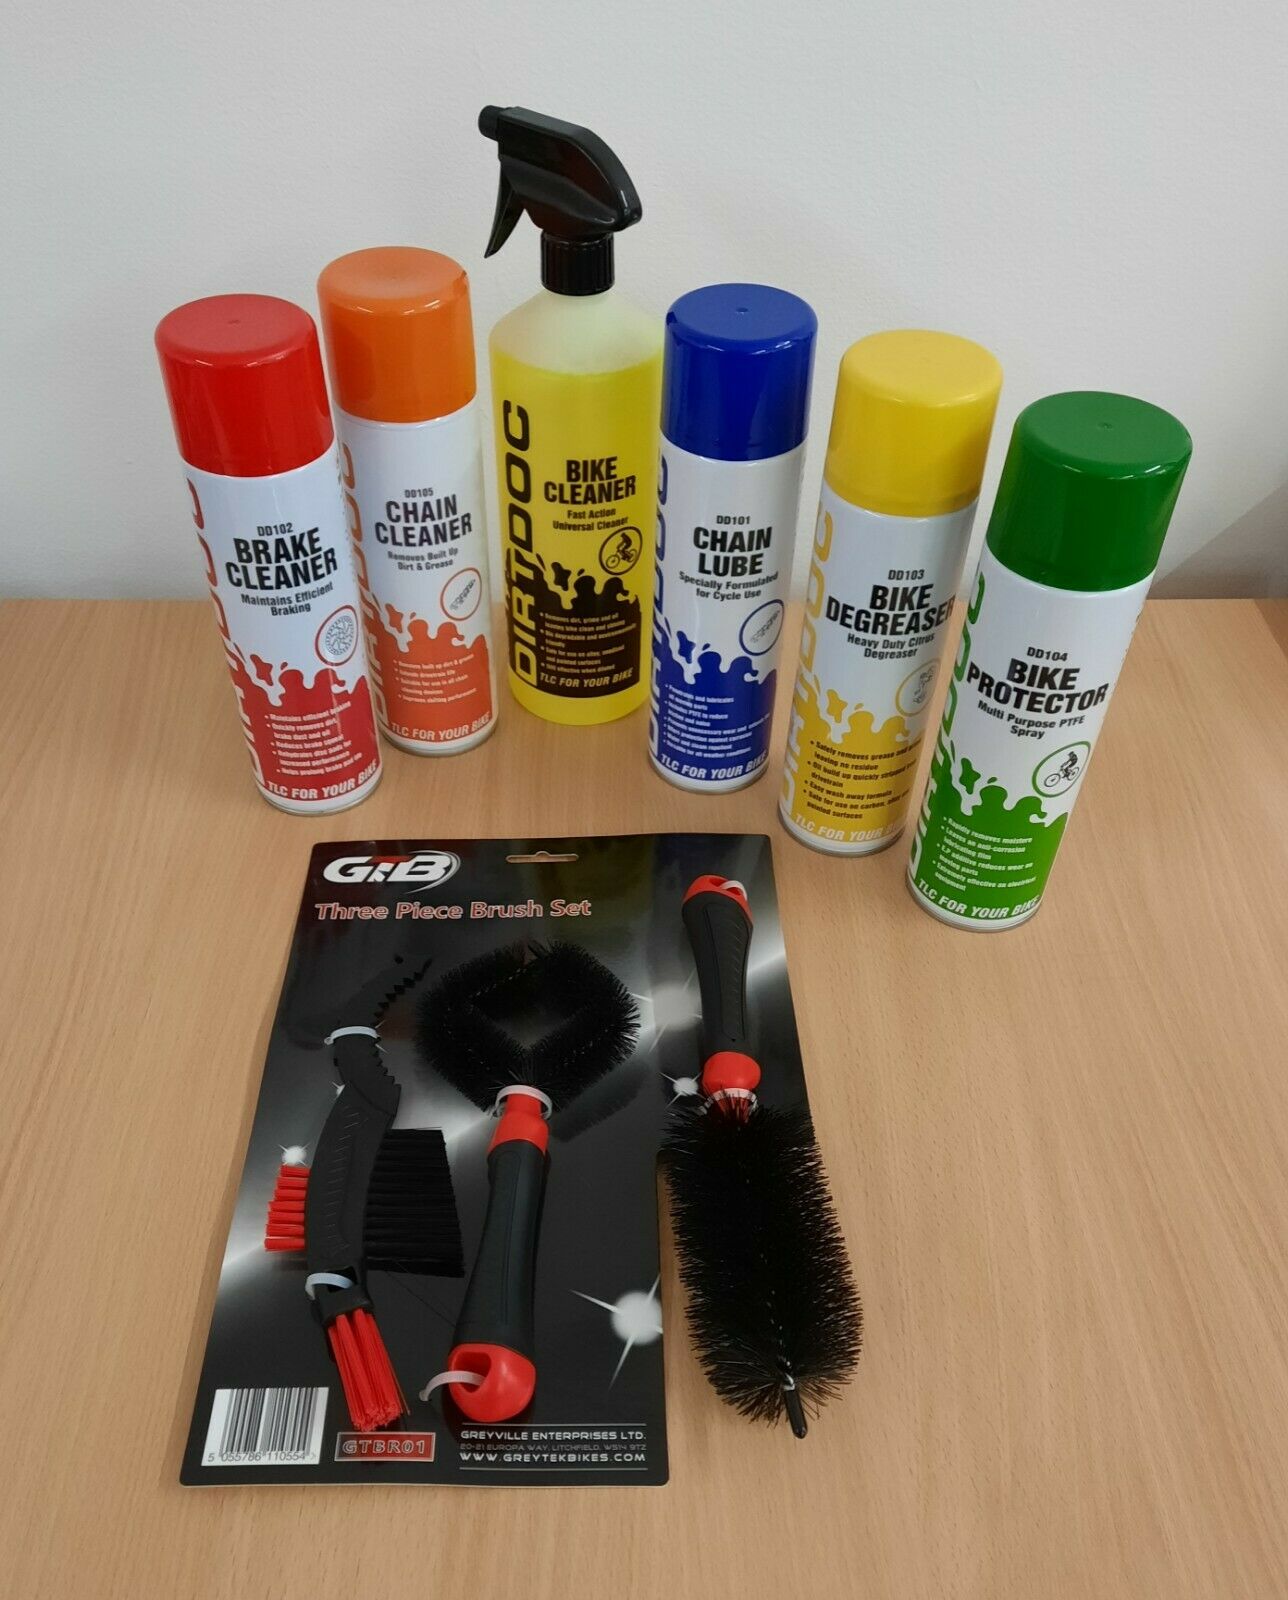 GTB Complete Bicycle Care Kit